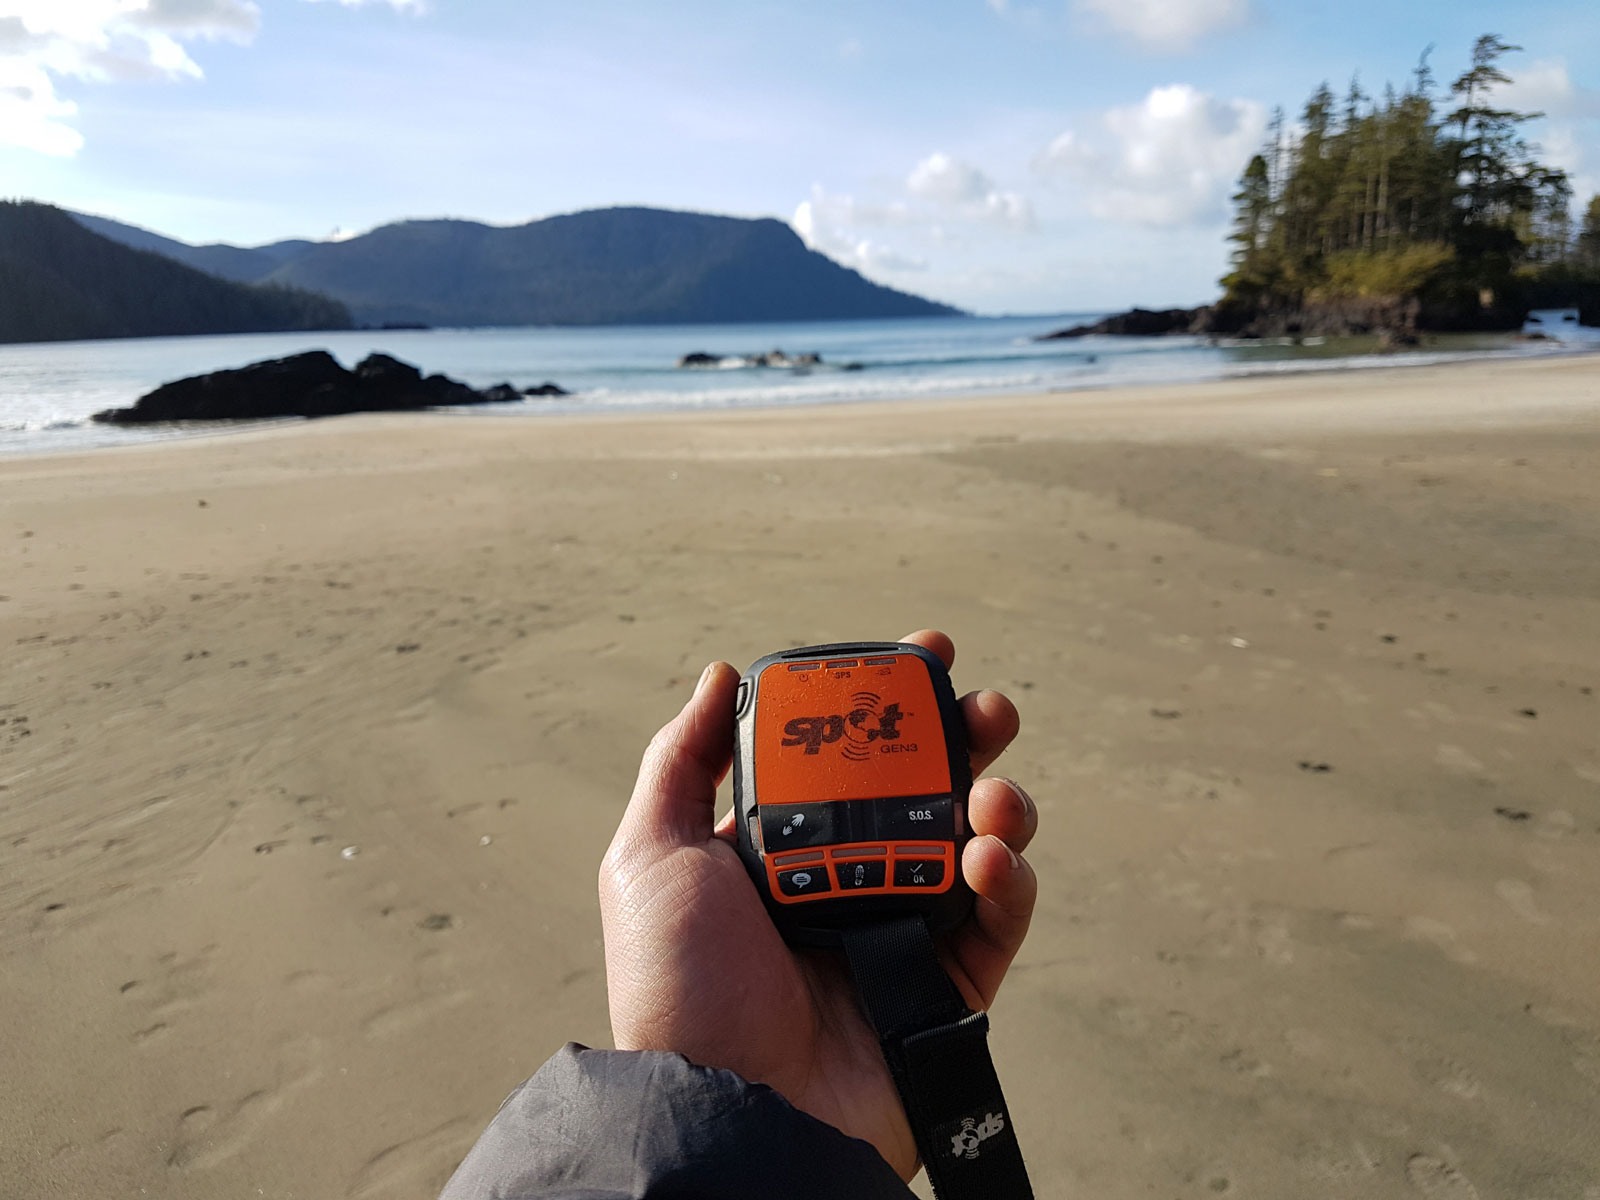 Vancouver Island beach with hand holding compass